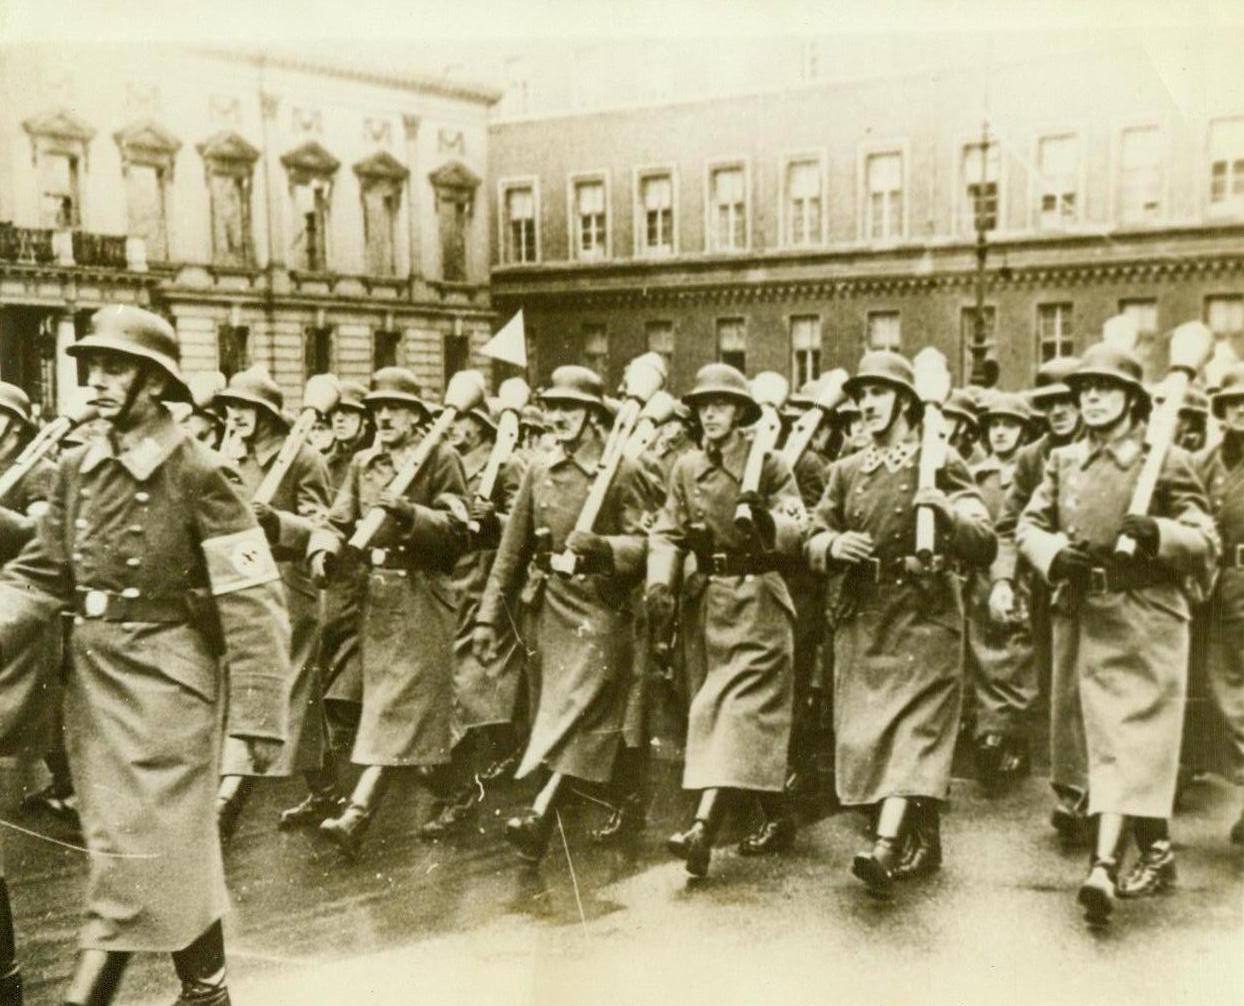 "People's Army" on Parade, 12/30/1944. Berlin—Equipped with anti-tank weapons, members of the Volkssturm parade in Berlin, according to the German caption accompanying this photo, which was obtained through a neutral source. The parade, the Nazis say was held in honor of Josef Goebbels after his address to the “People’s Army.” 12/30/44 ACME;